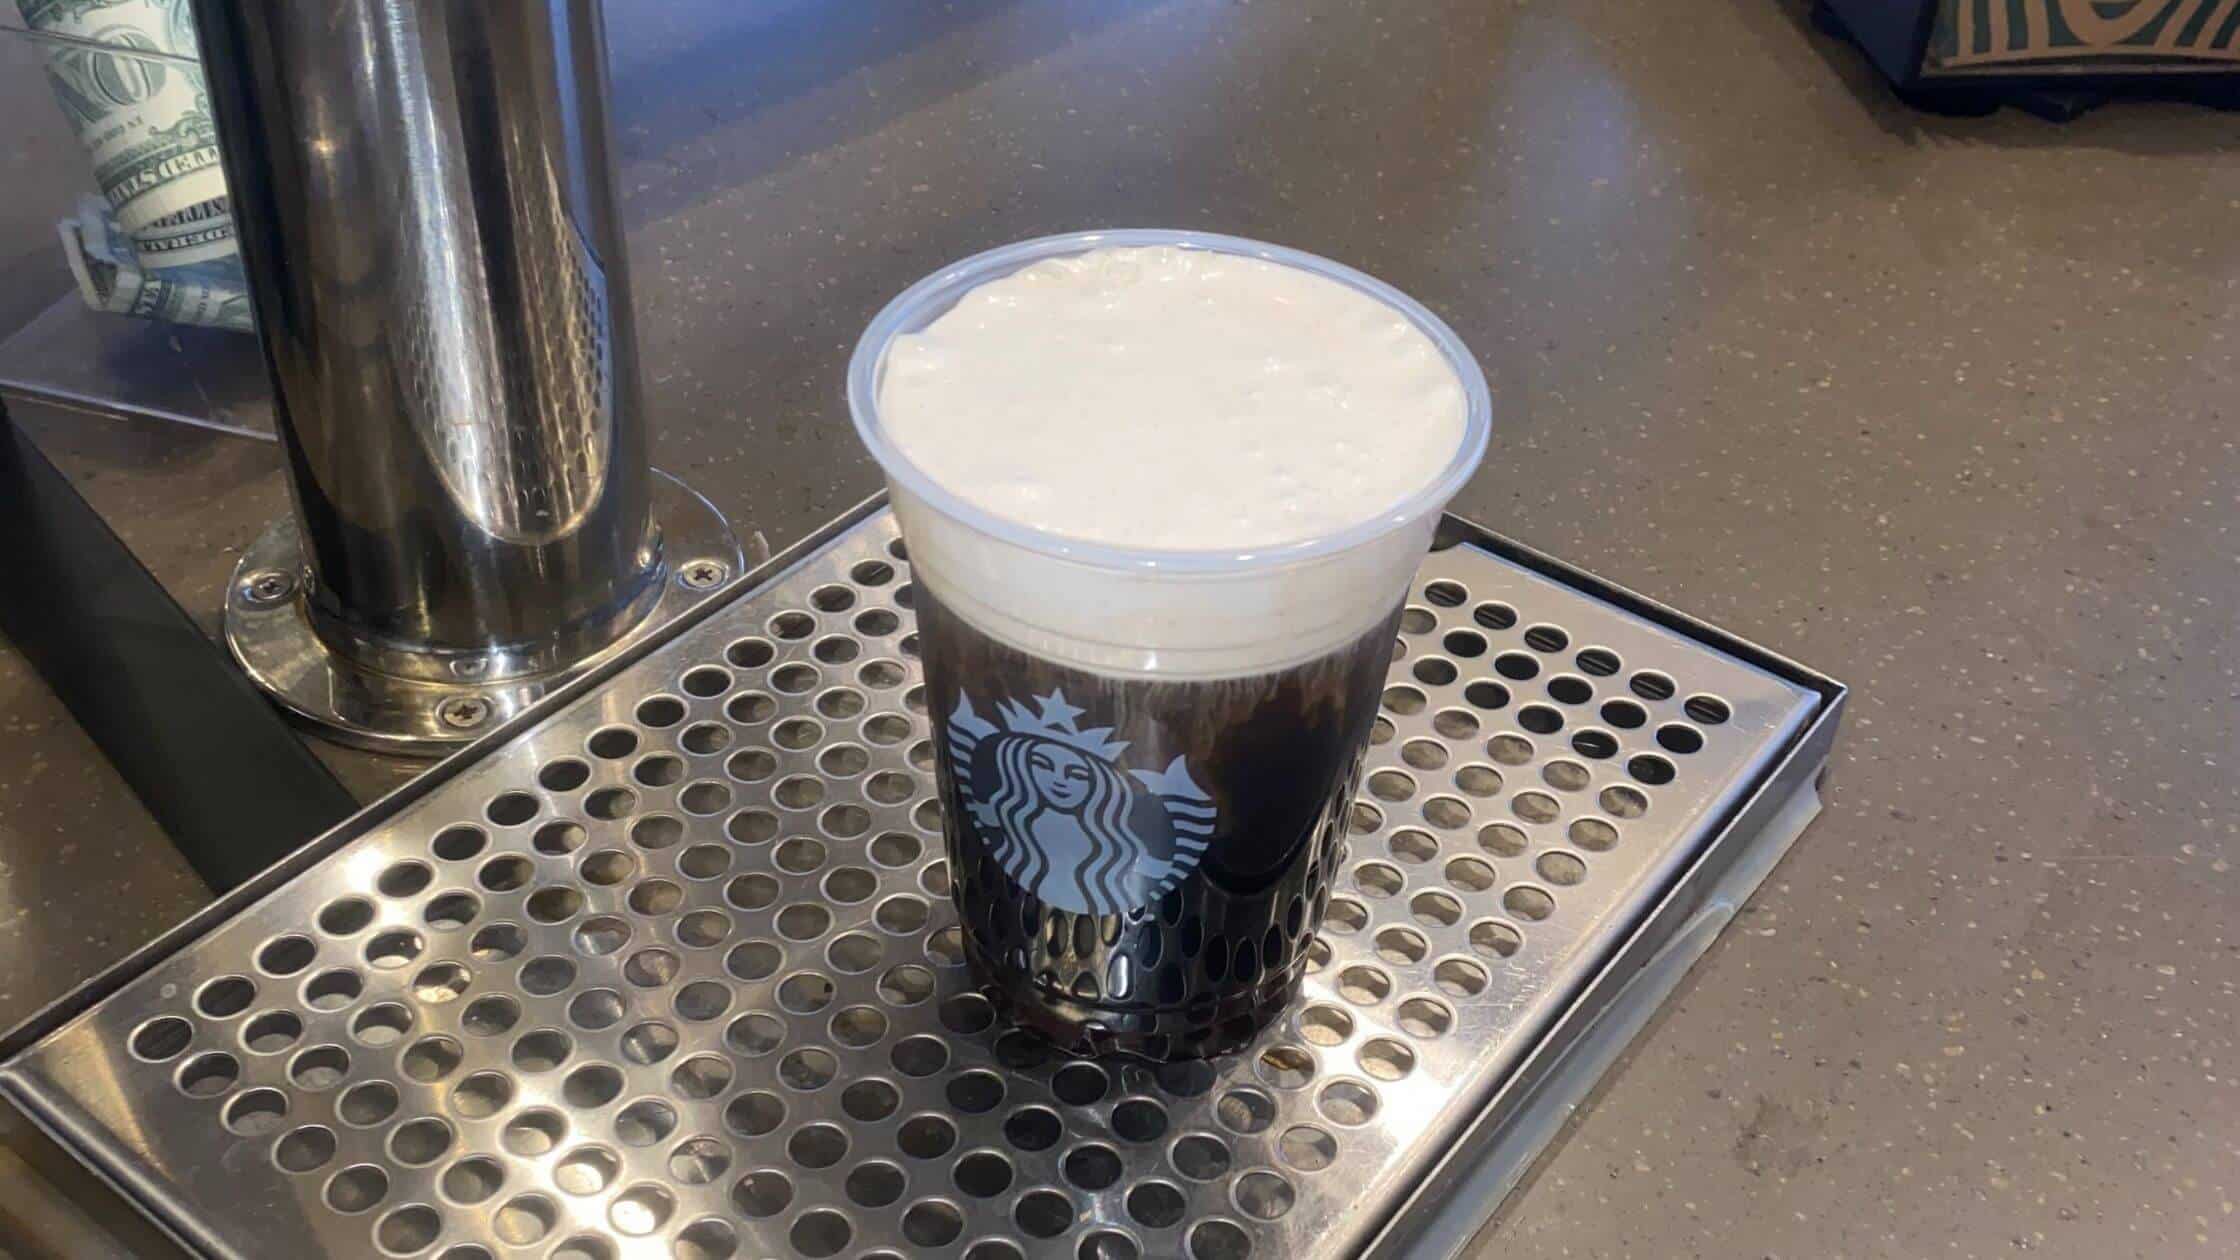 https://celestelili.com/wp-content/uploads/2021/04/5-Starbucks-Cold-Brew-Orders-to-Try-out-When-You-Want-Something-New.jpg